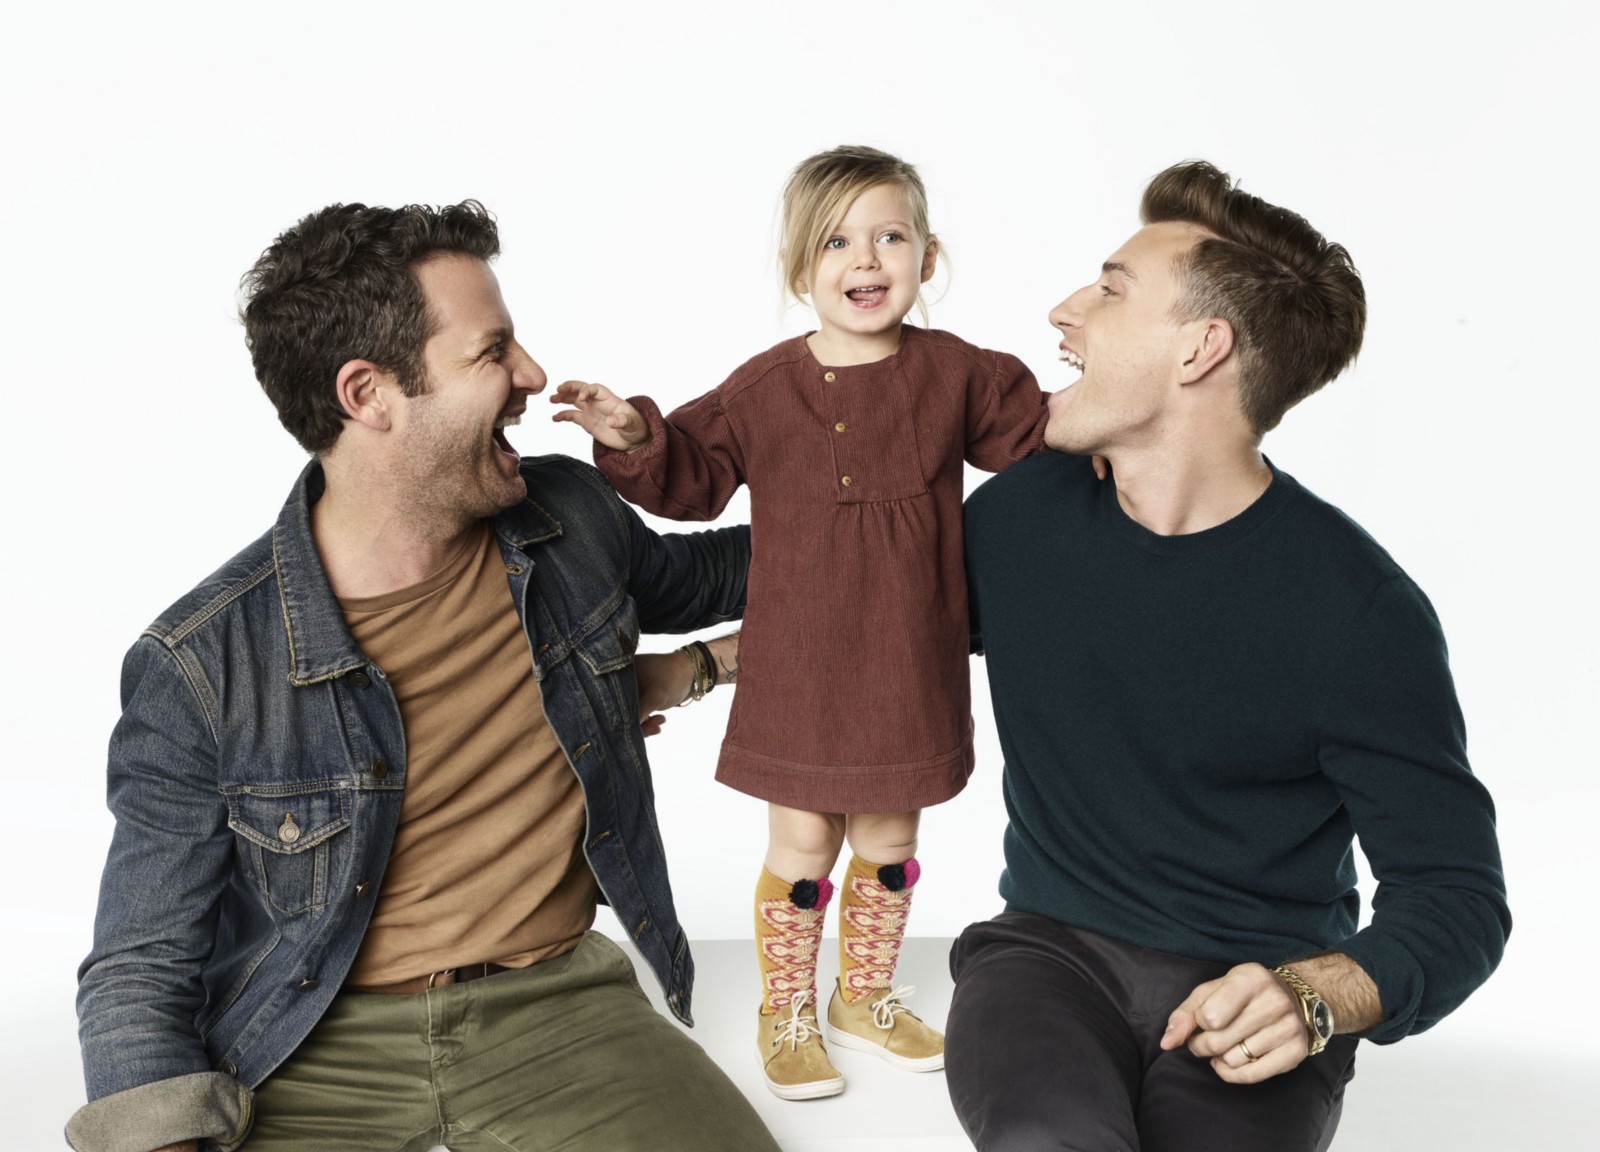 Family Equality Council to Honor Nate Berkus & Jeremiah Brent at Los Angeles Impact Awards Gala